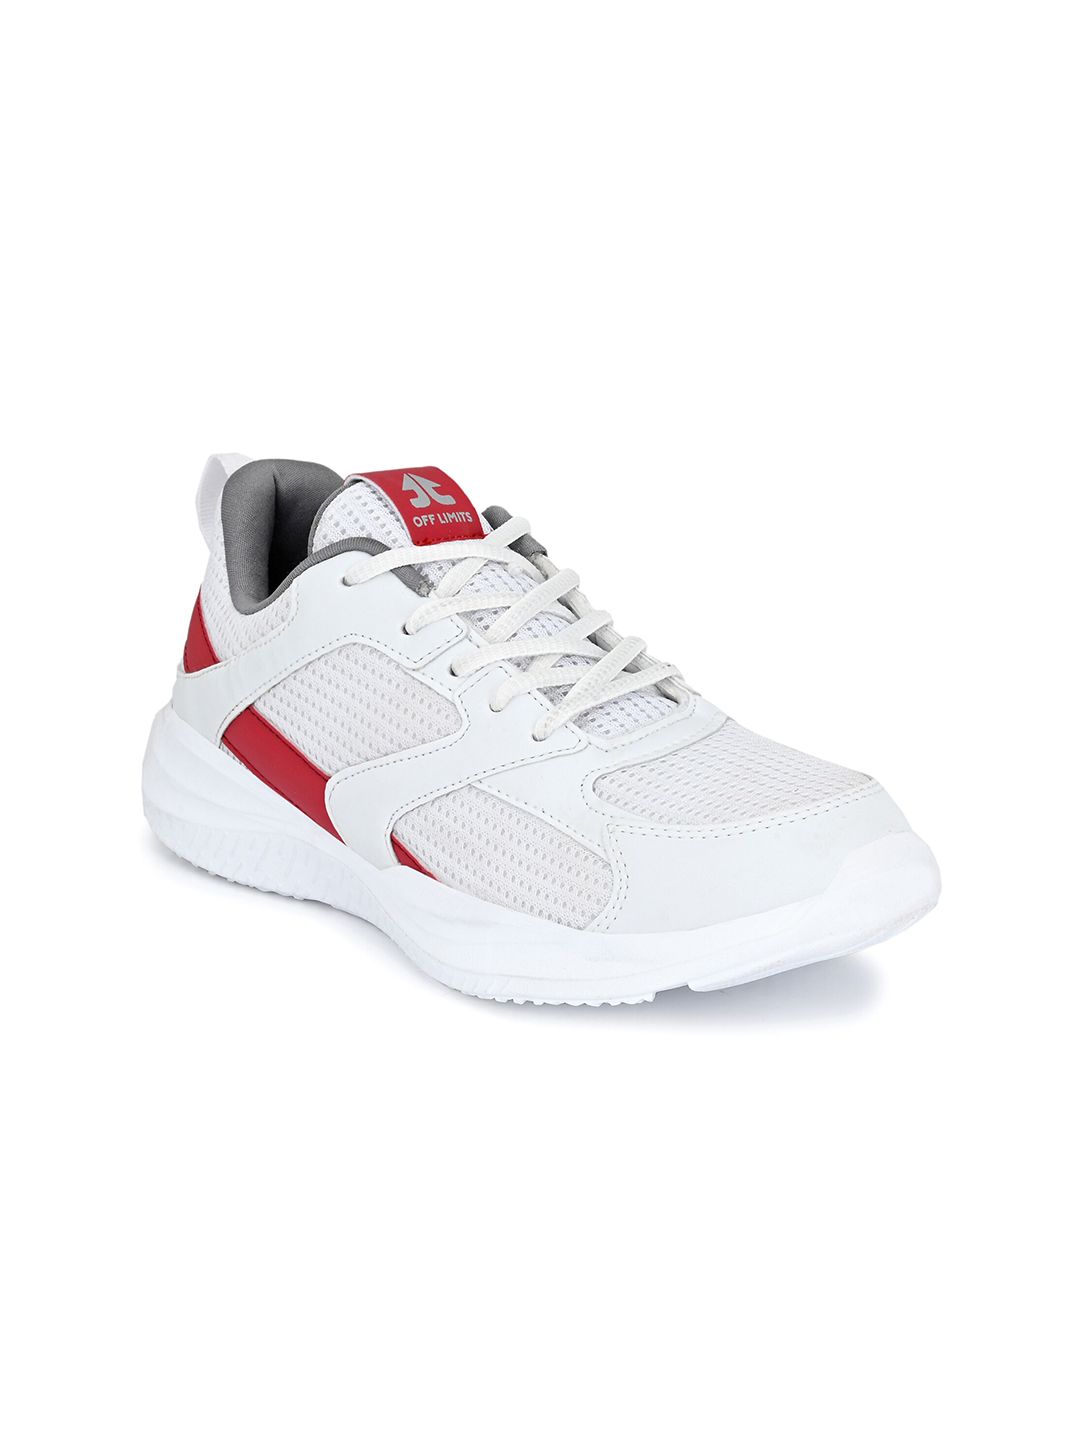 OFF LIMITS Women White Mesh Running Non-Marking Shoes Price in India